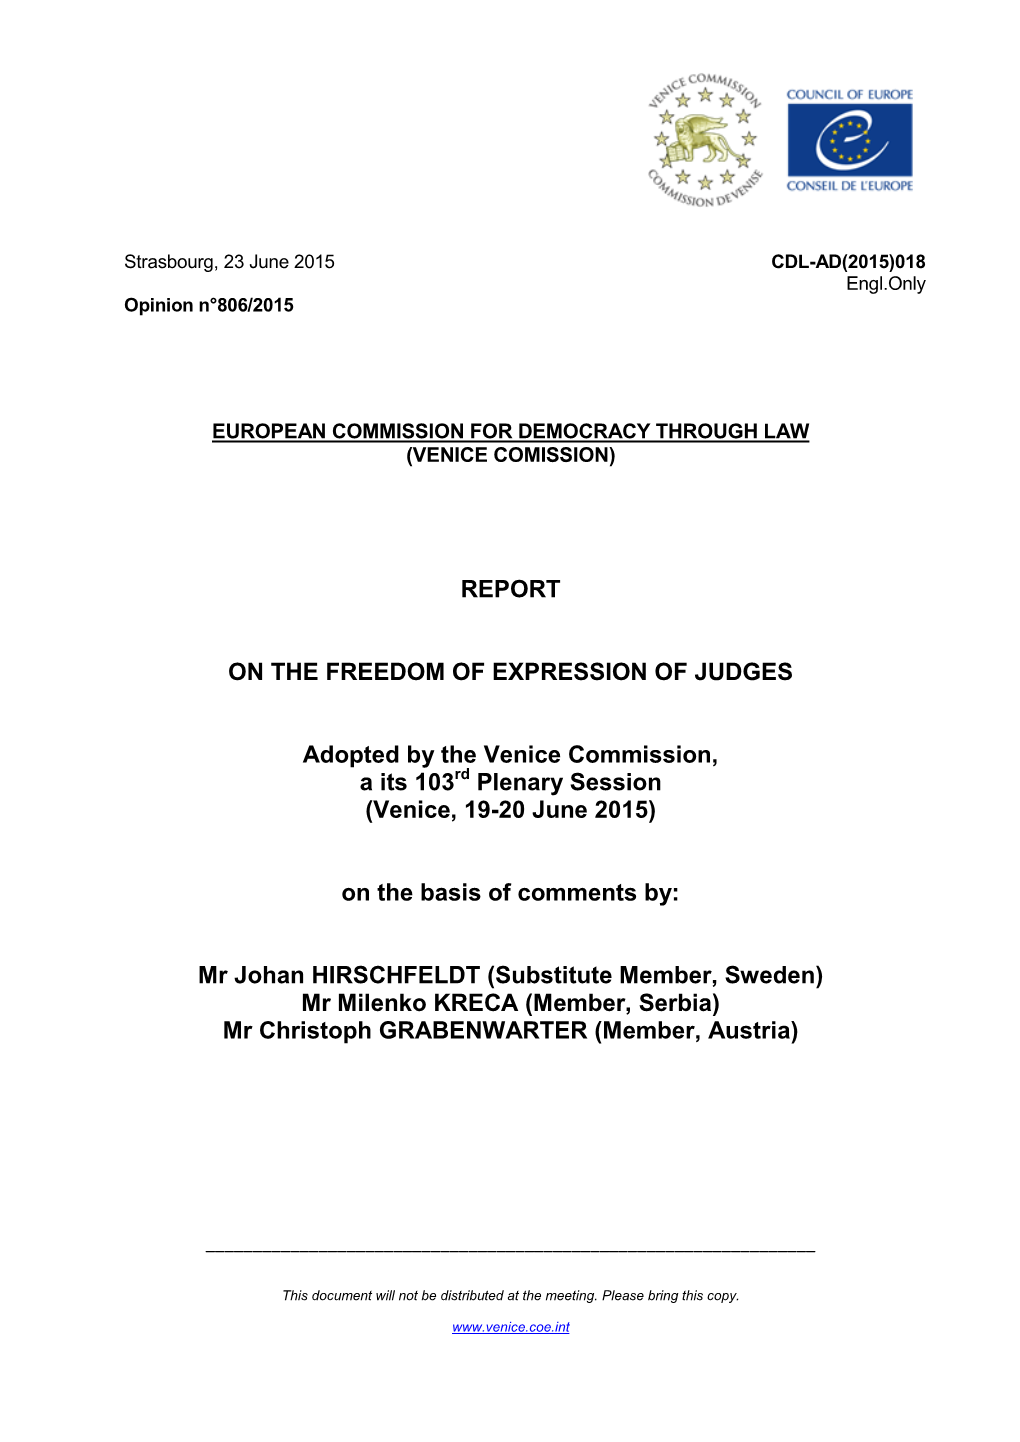 Report on the Freedom of Expression of Judges